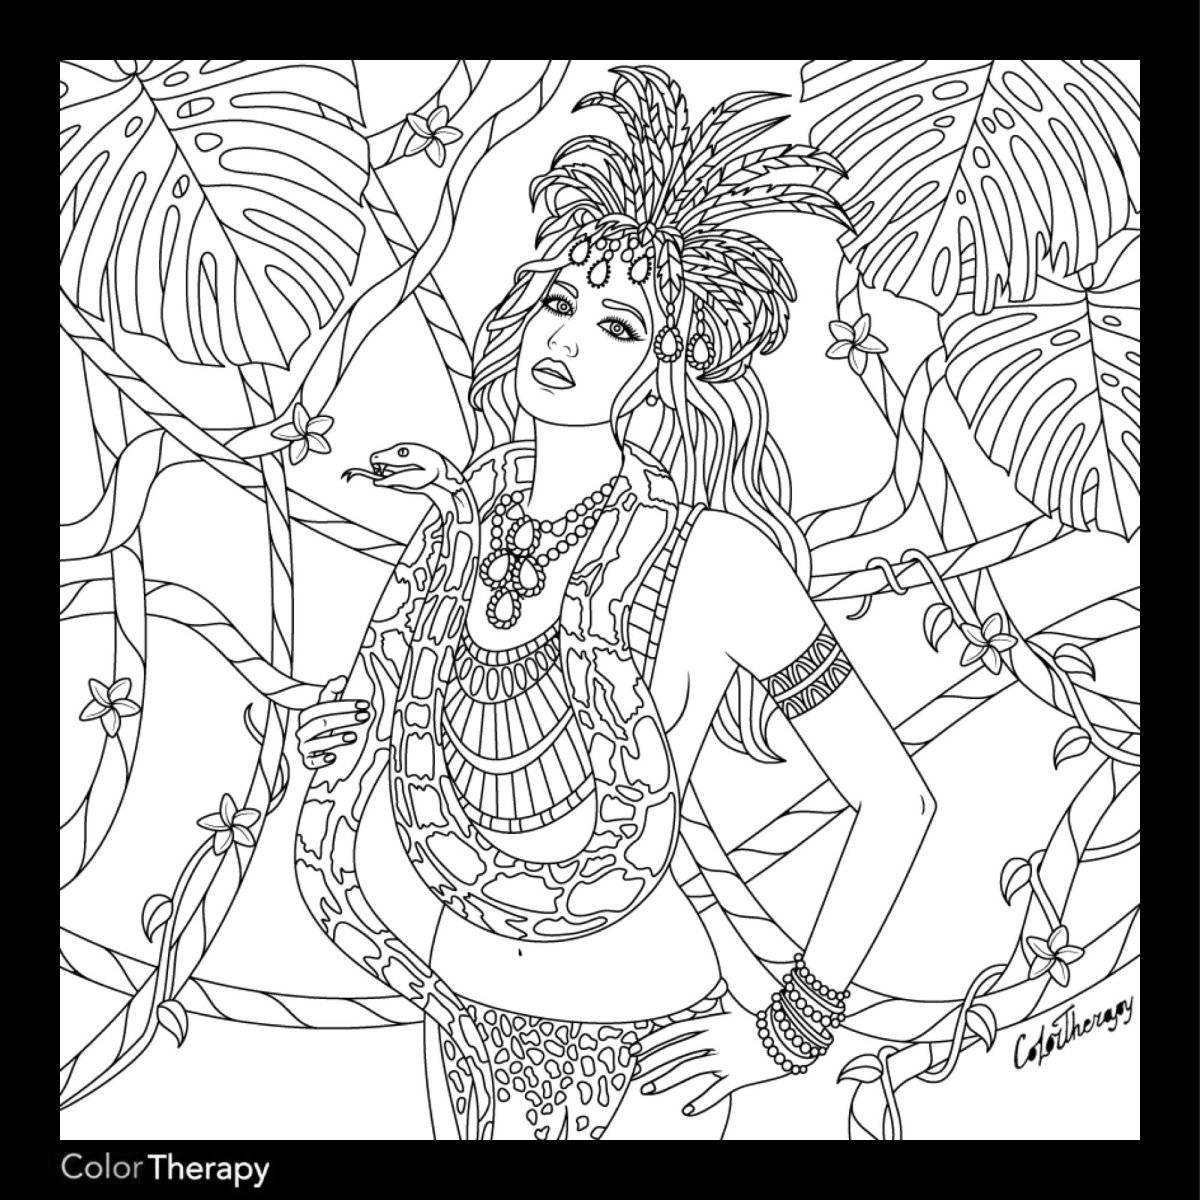 Charming Shamakhan queen coloring book